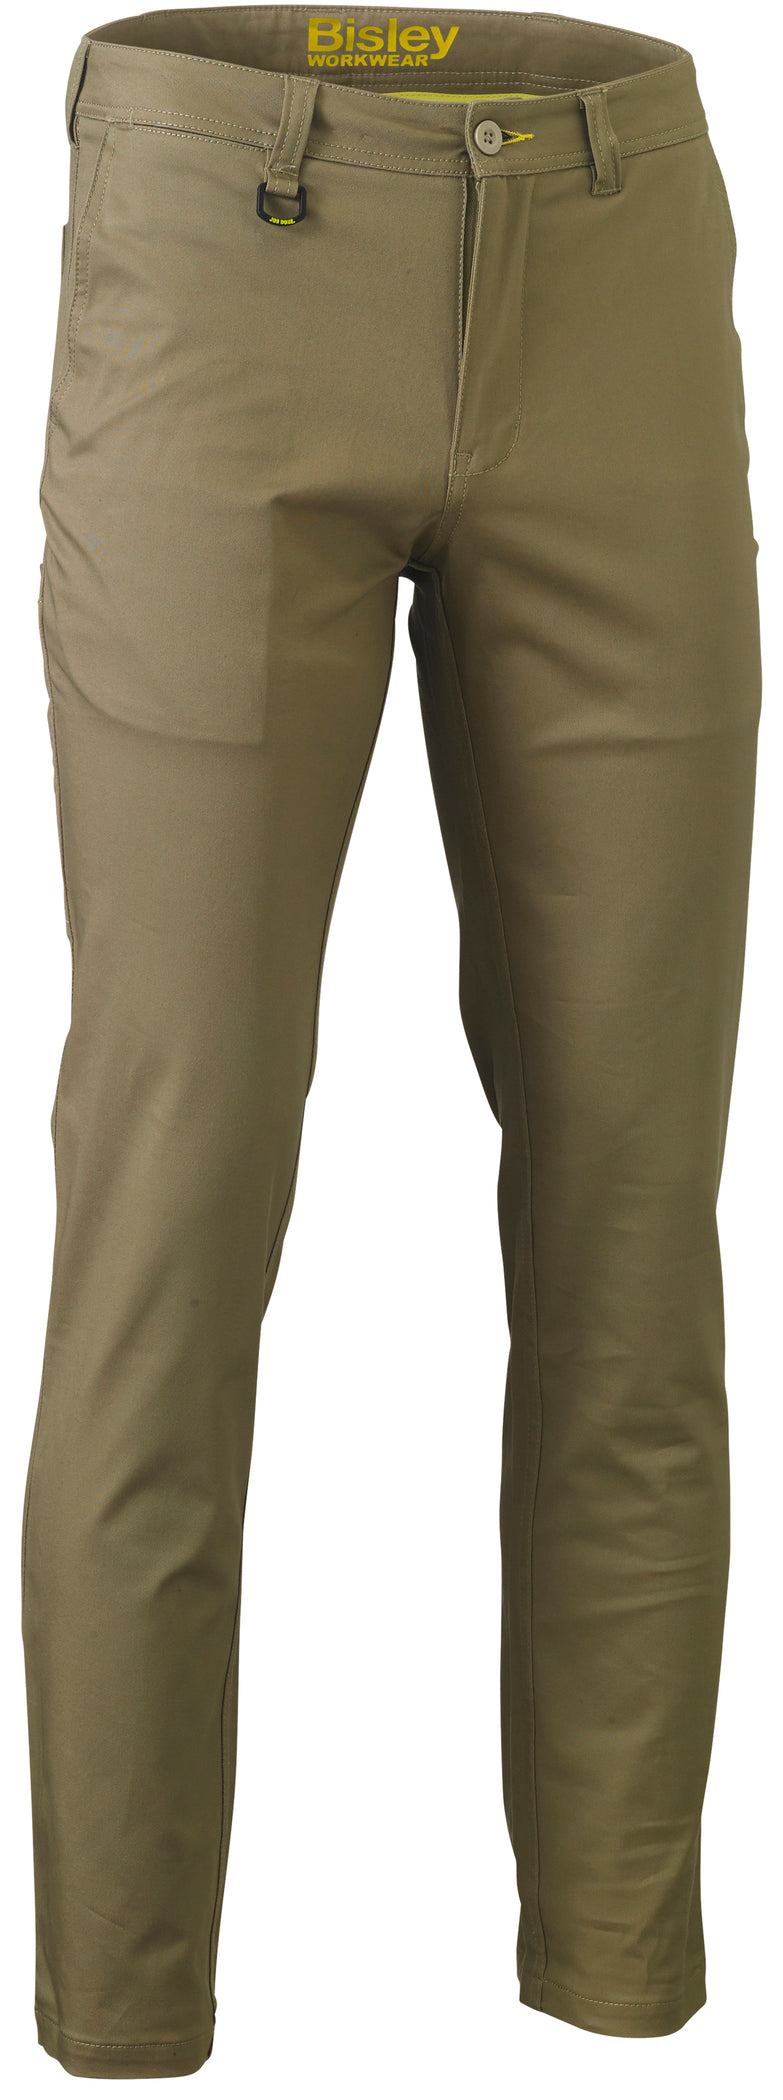 Load image into Gallery viewer, Wholesale BP6008 Bisley Stretch Cotton Drill Work Pants - Stout Printed or Blank
